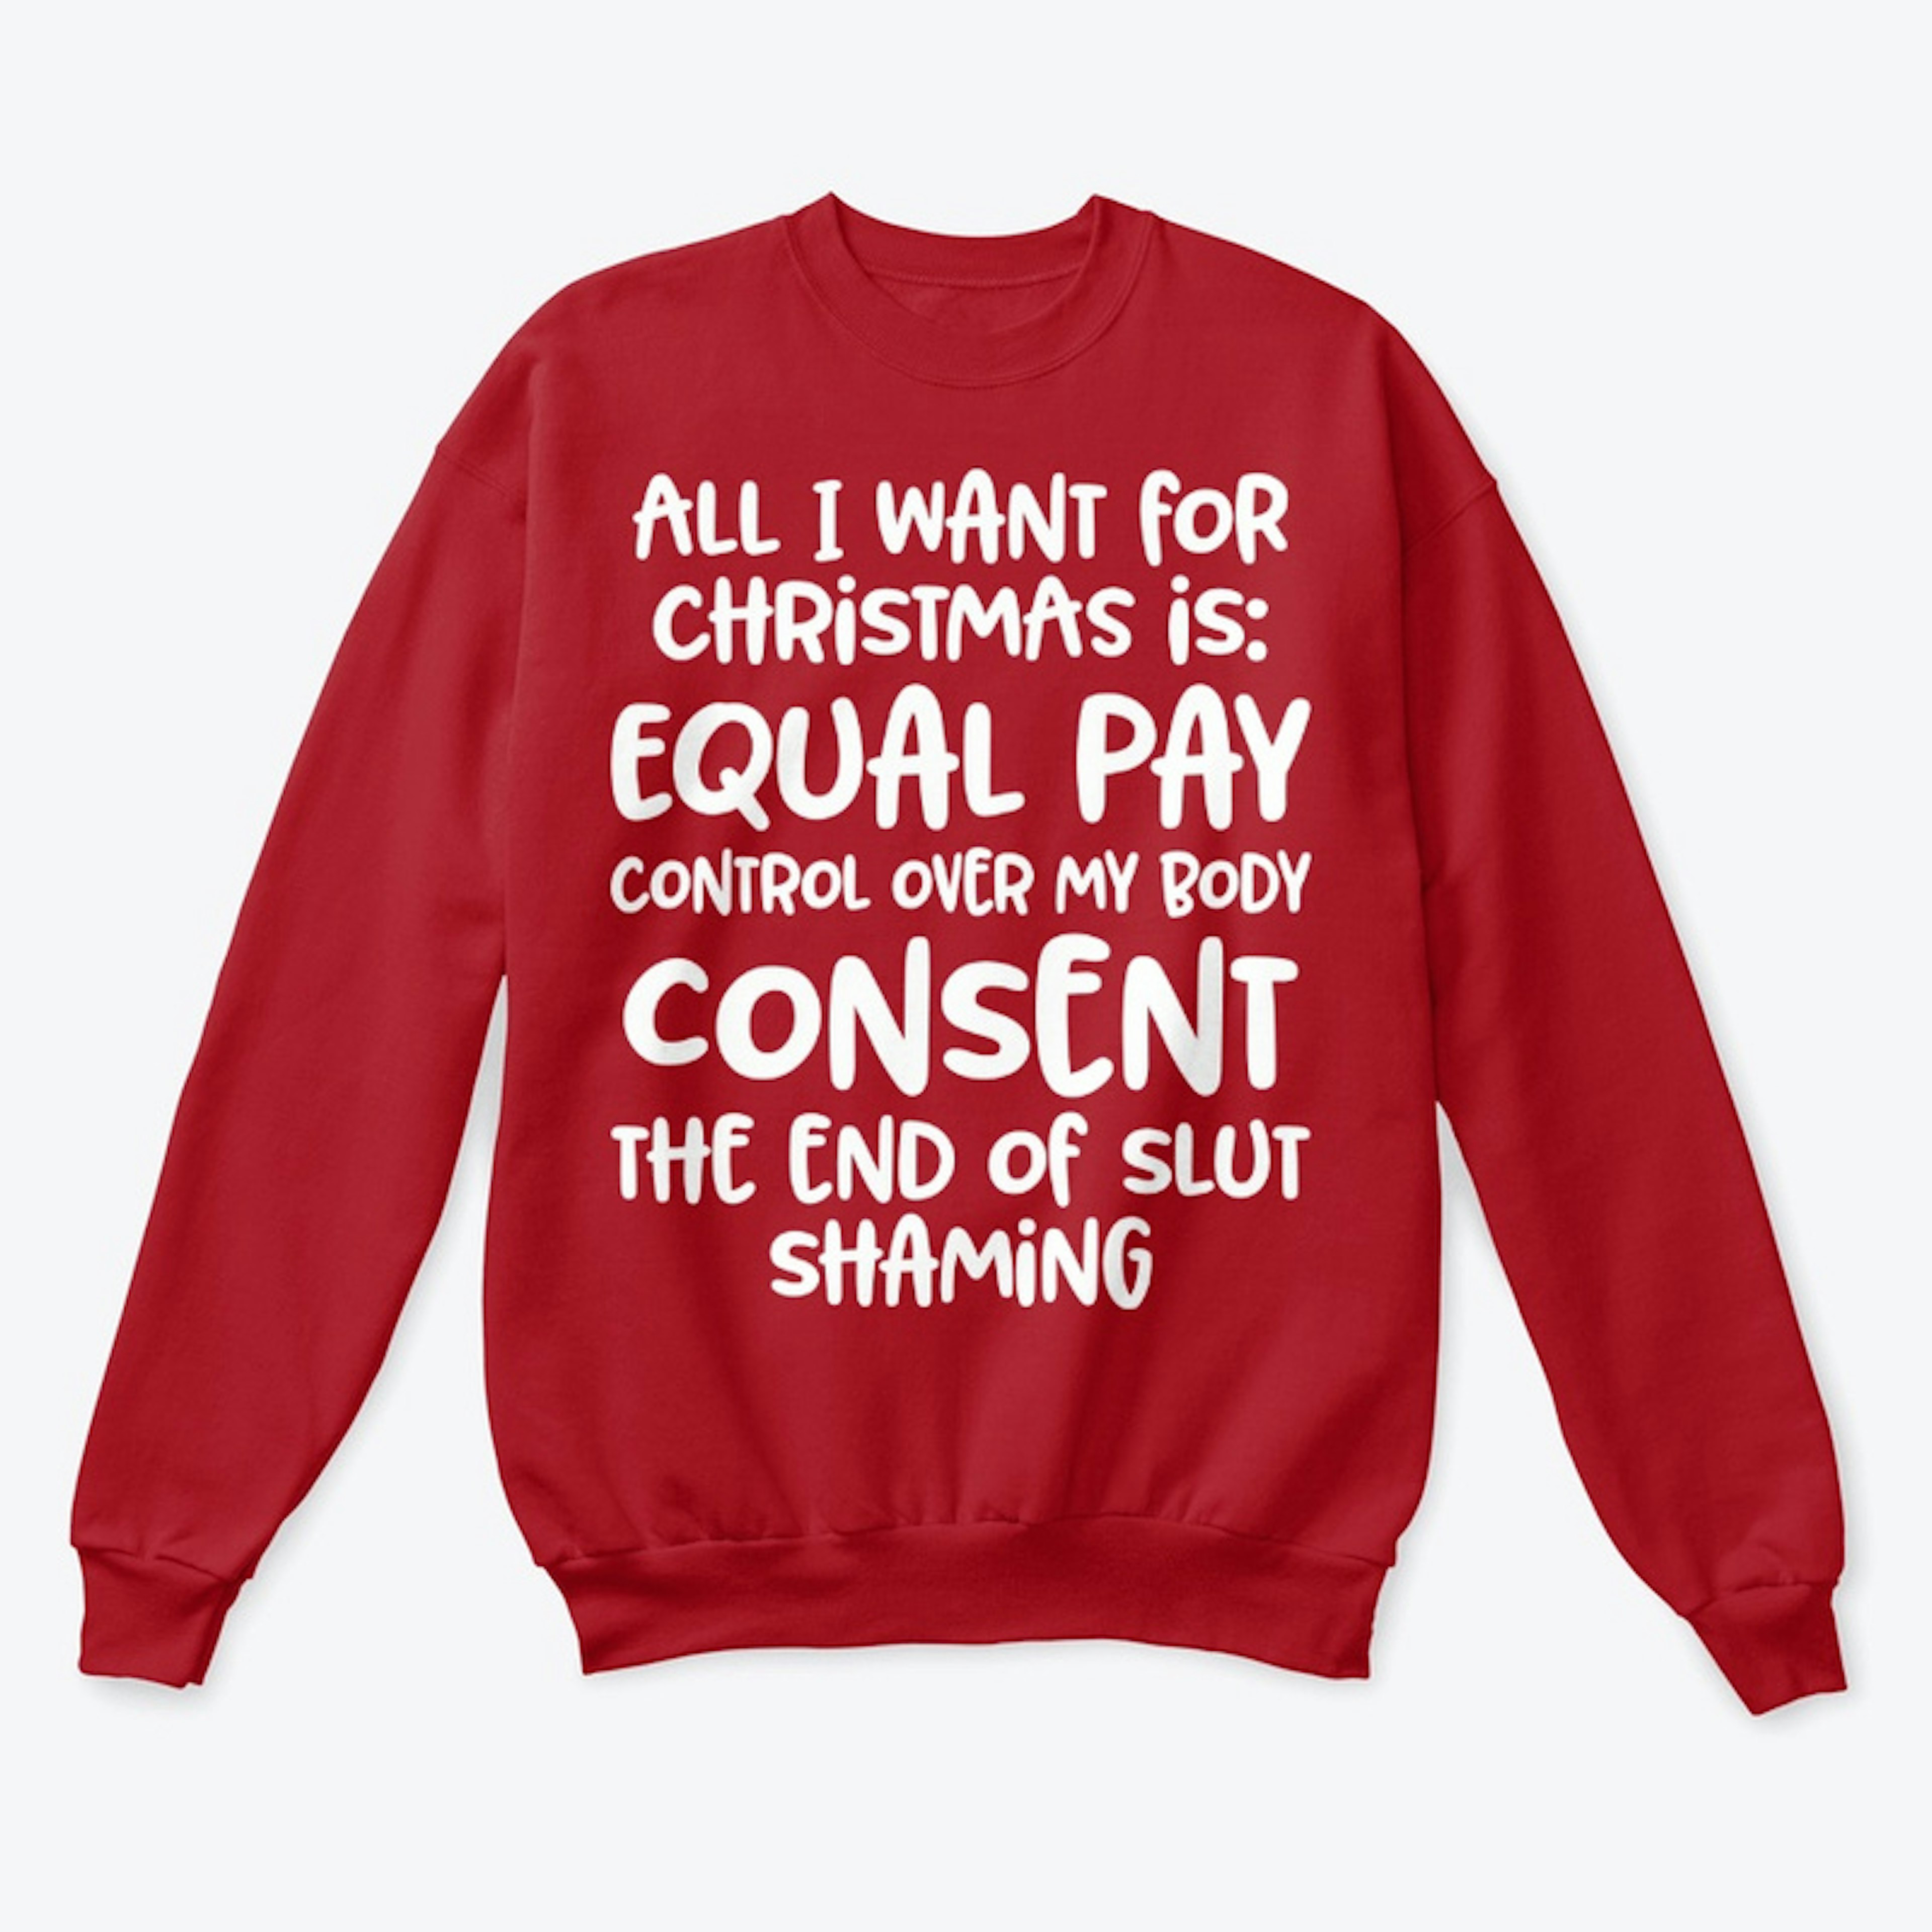 Strong Woman's Christmas Sweater